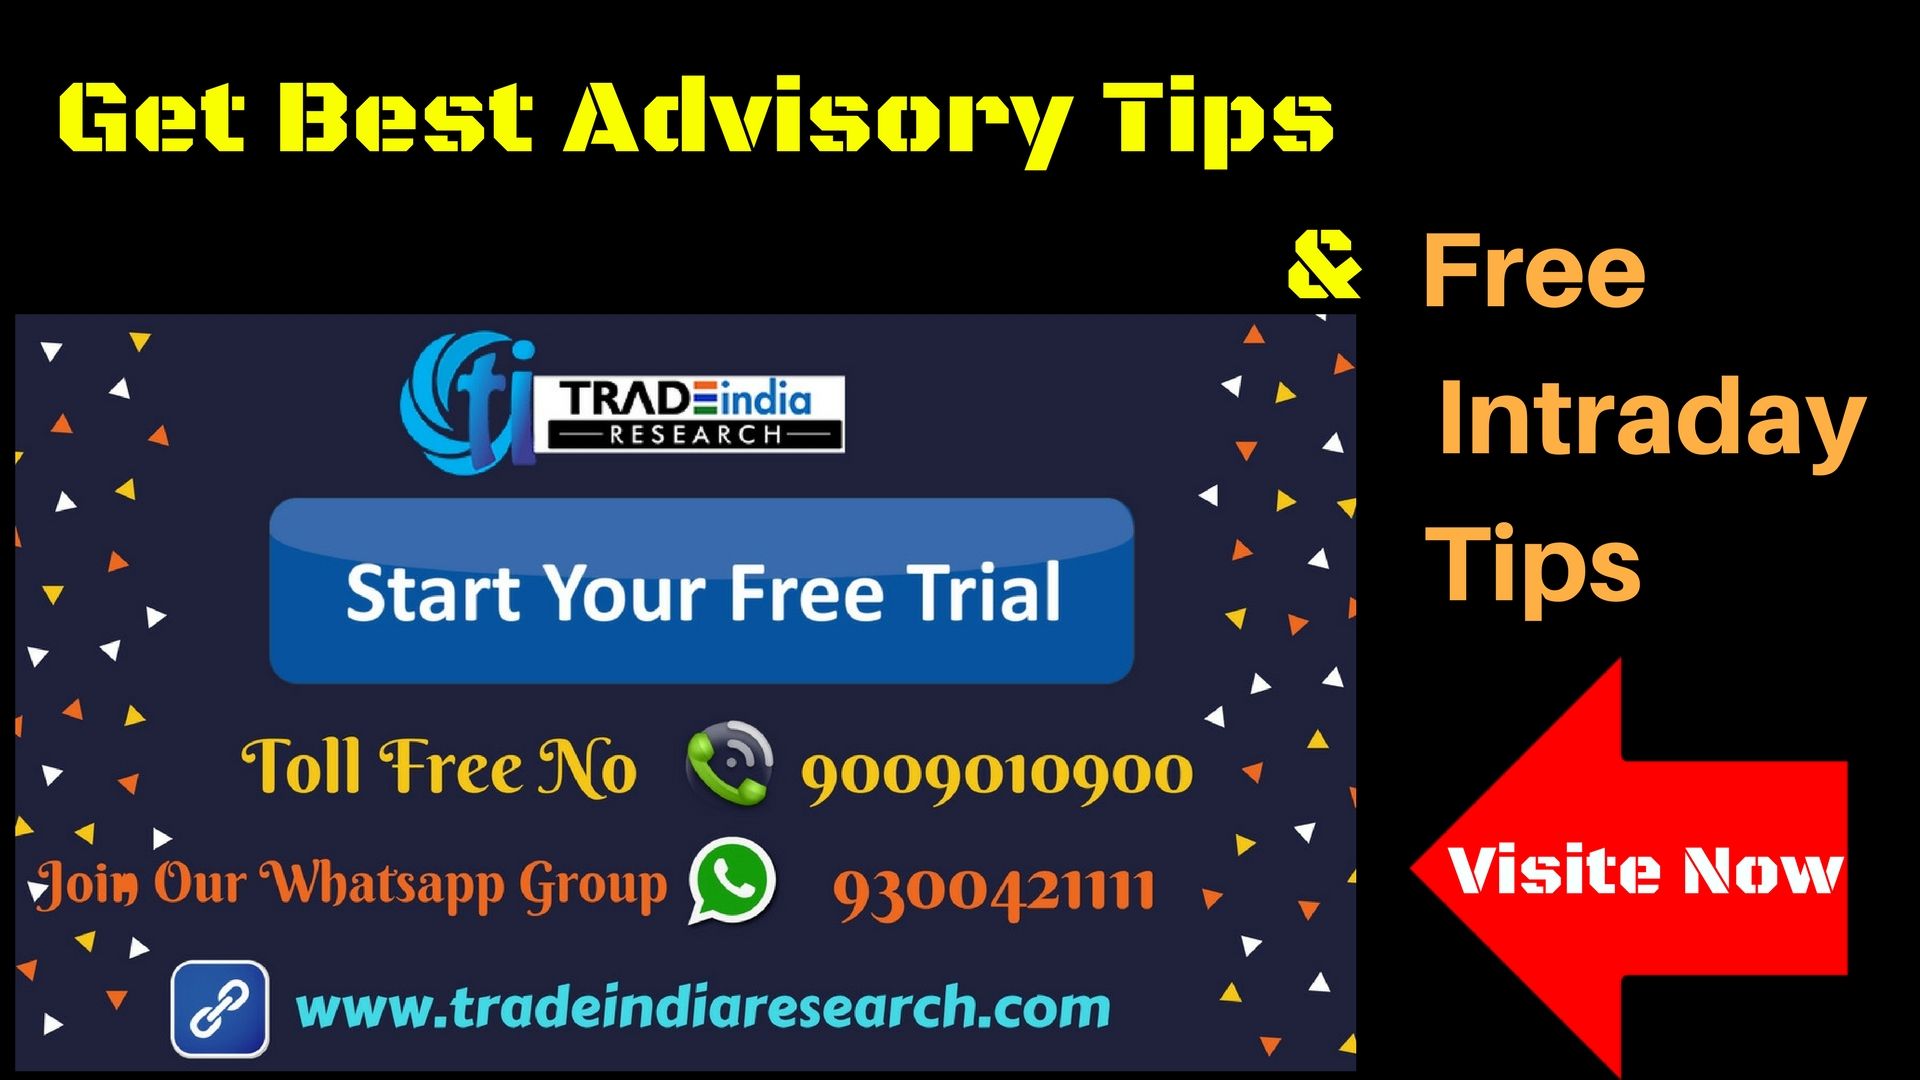 SEBI Registered Company in Indore | Free Intraday Tips | MCX Free Tips | Free Stock Tips